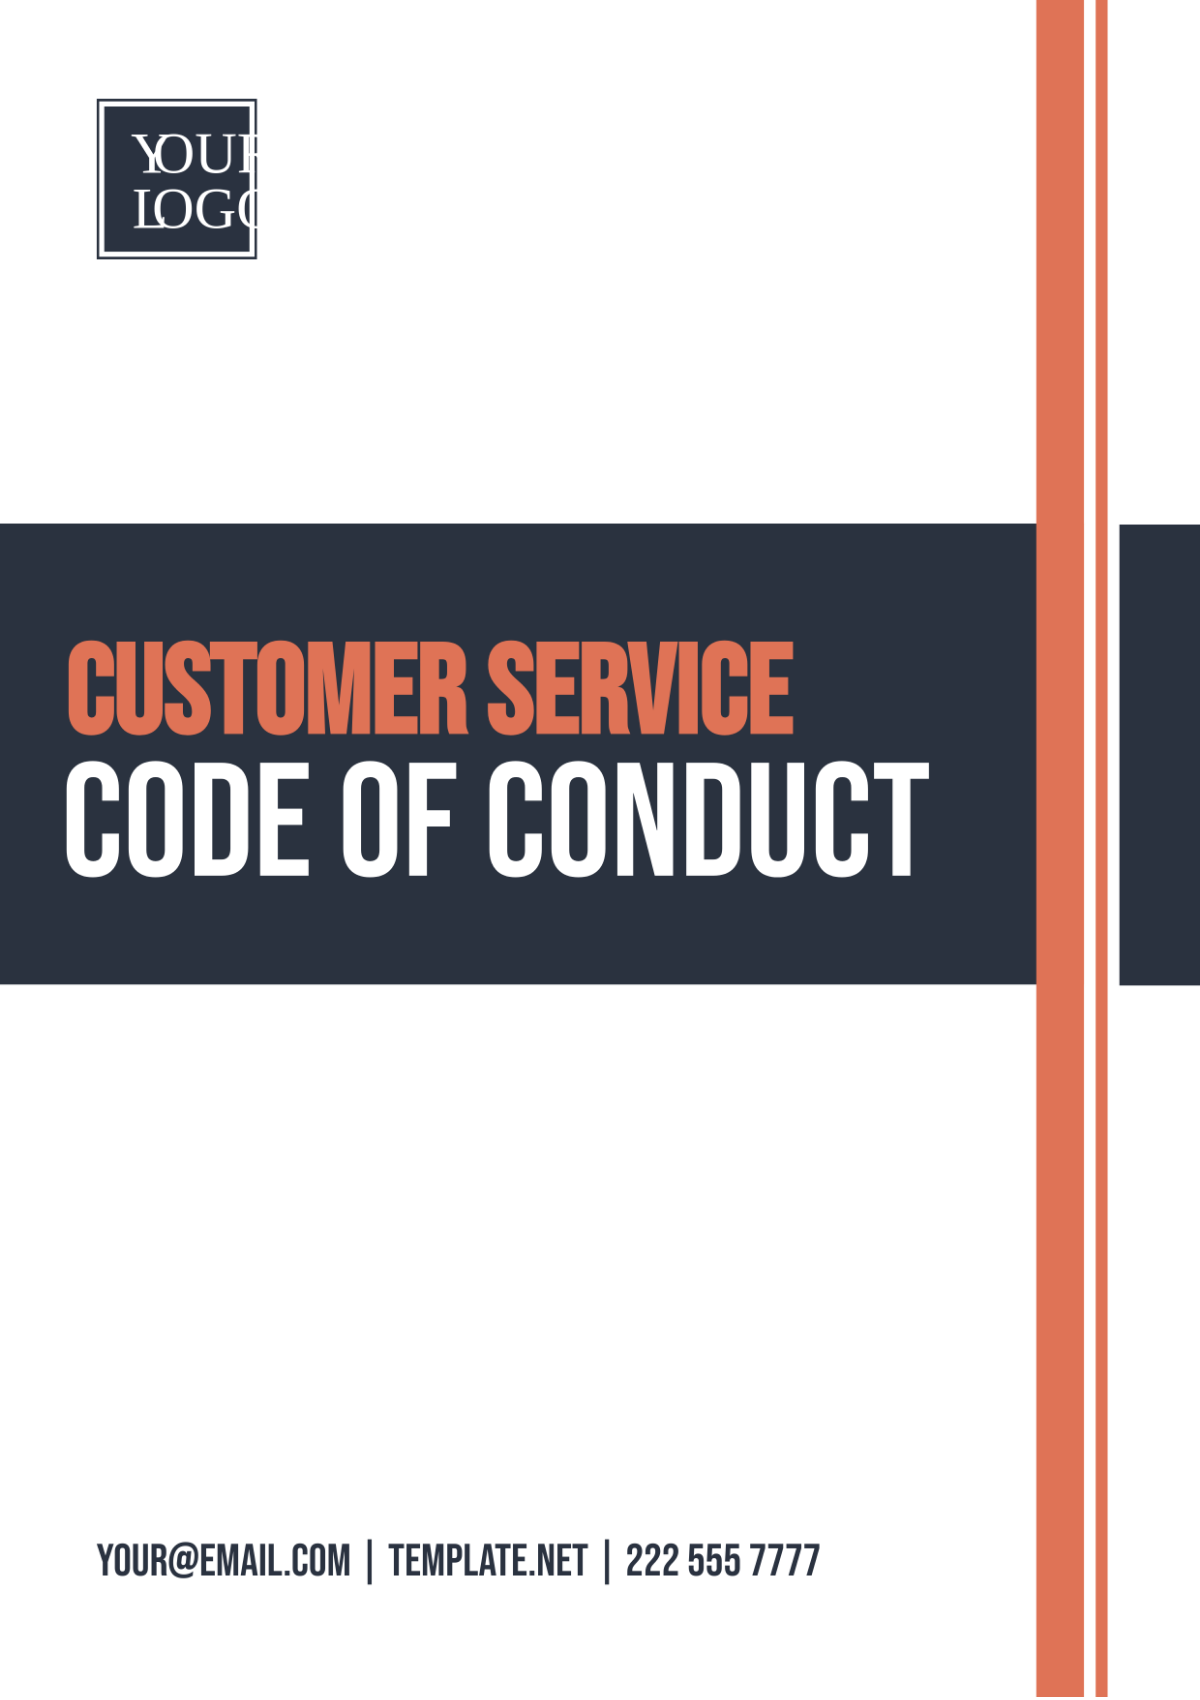 Customer Service Code of Conduct Template